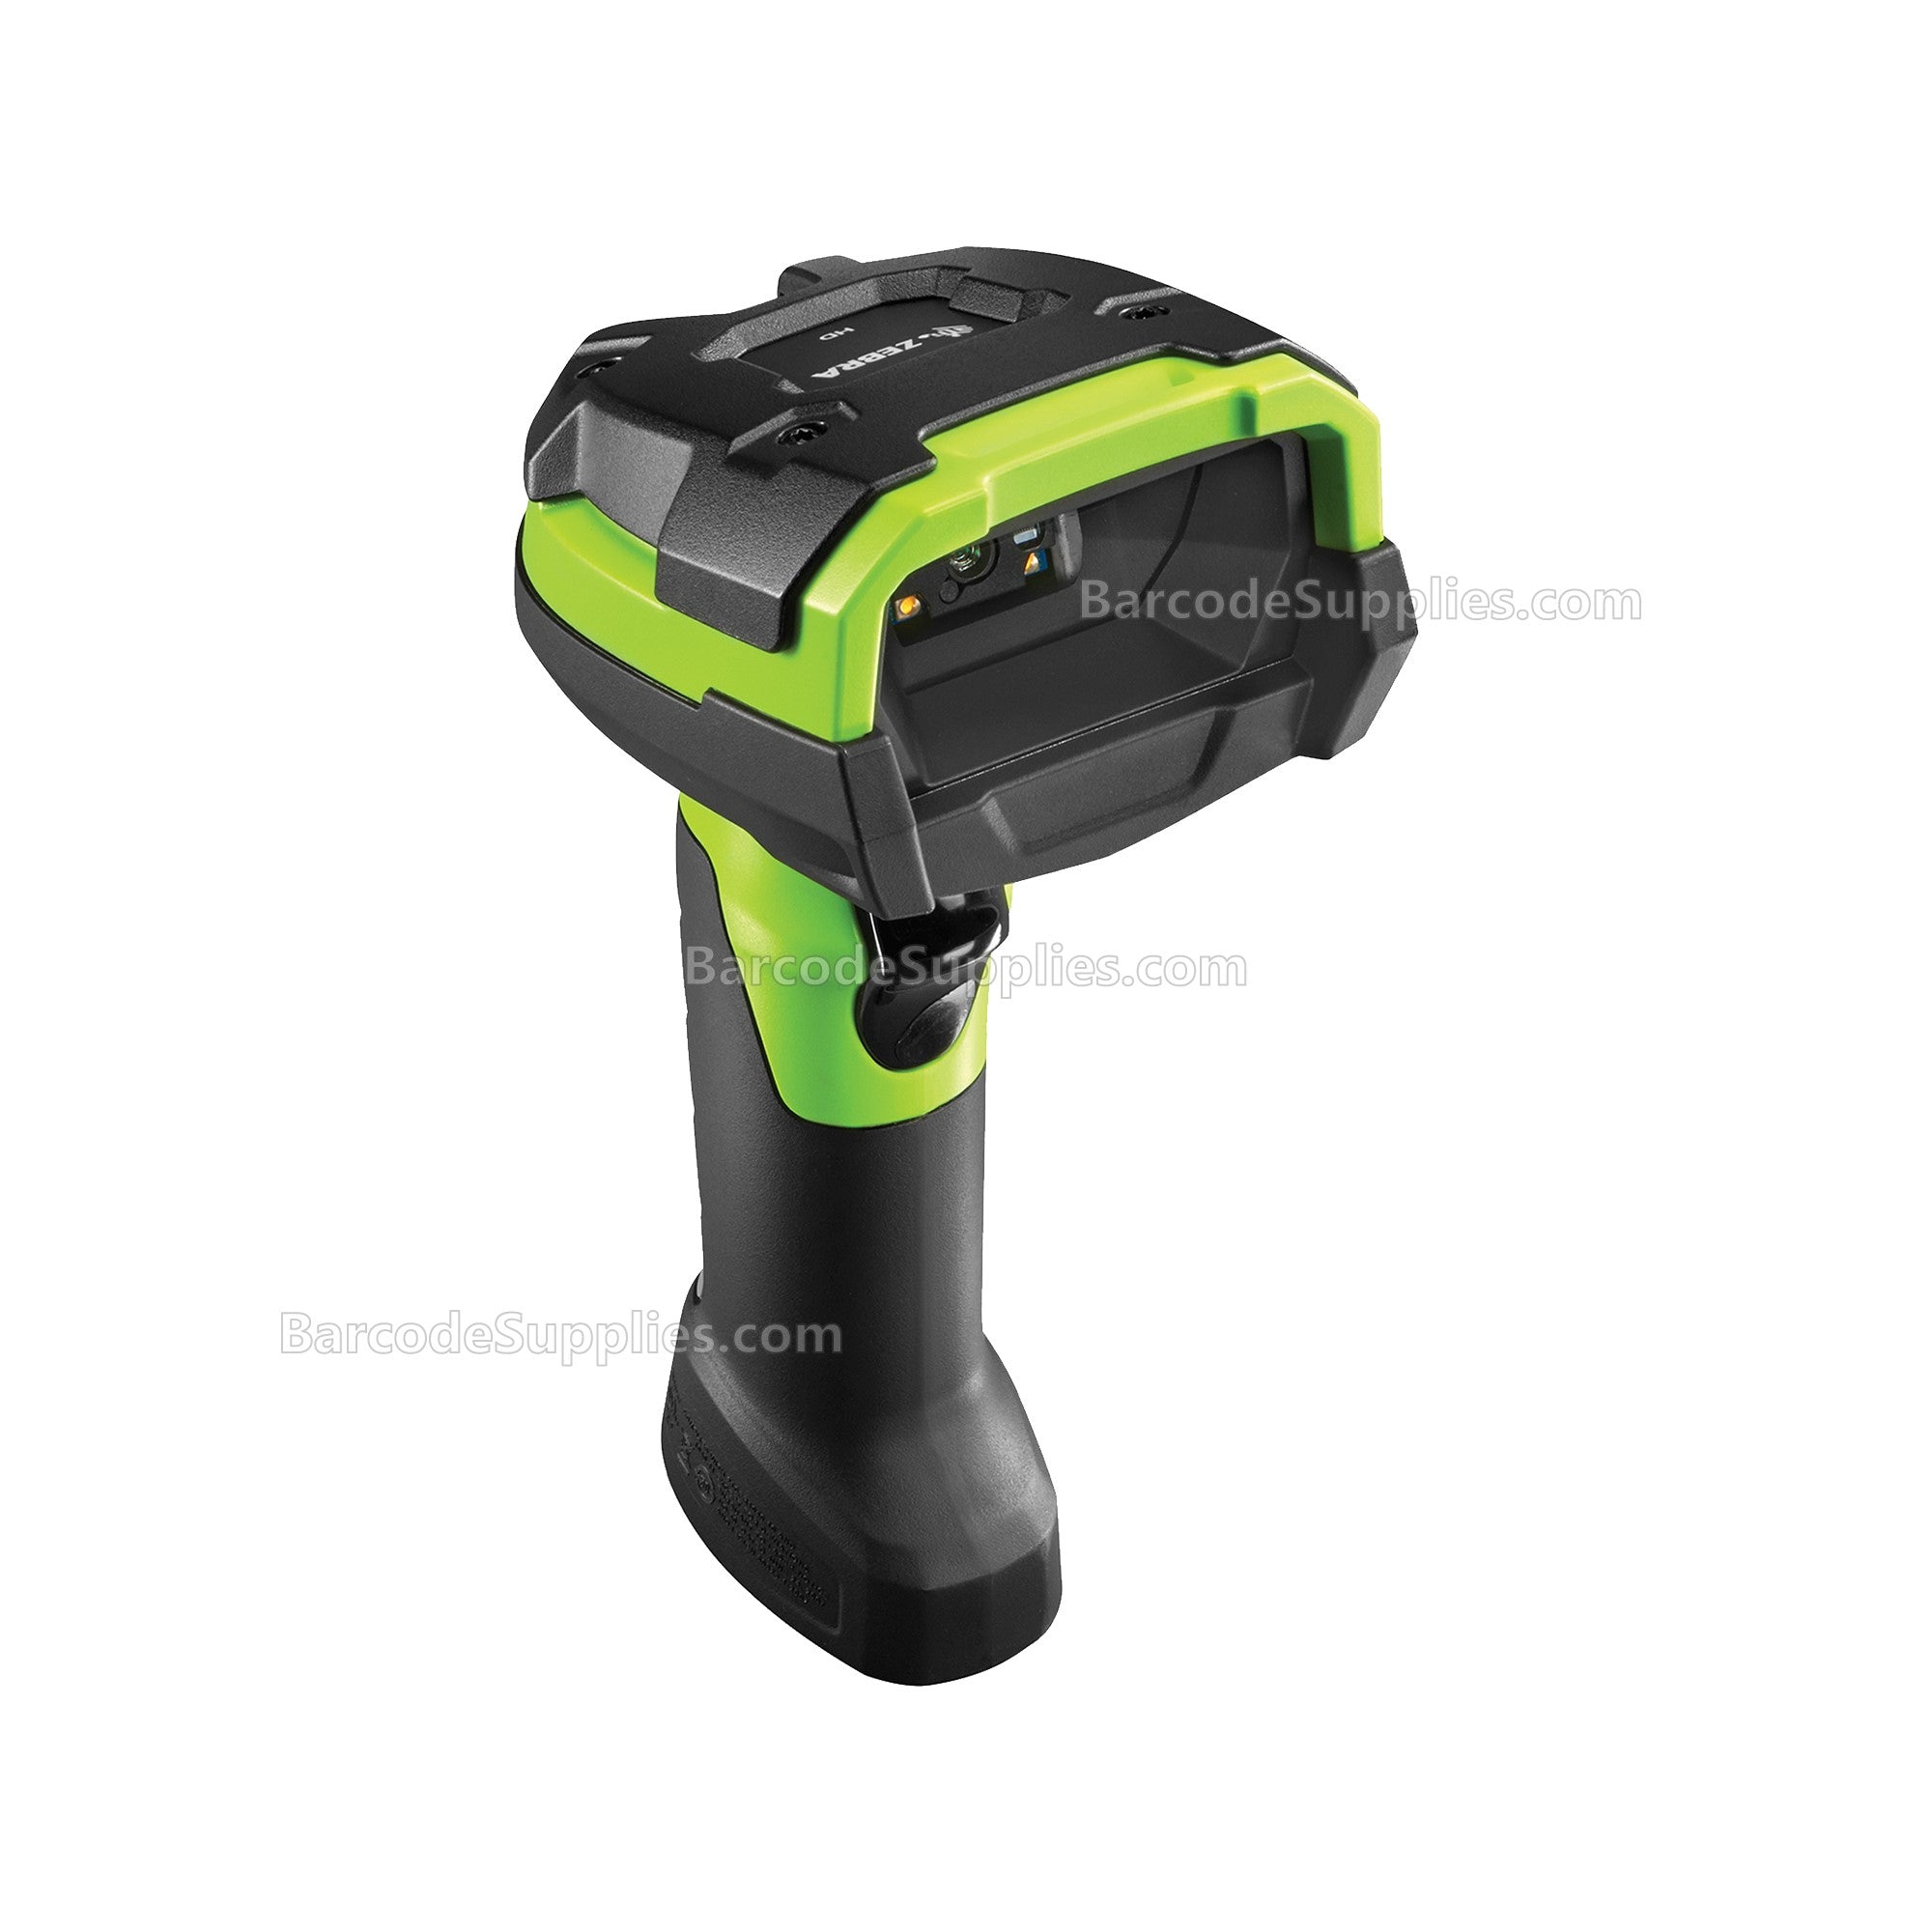 Zebra DS3678-HD Rugged Green Standard Cradle USB Kit: DS3678-HD2F003VZWW Scanner, CBA-U42-S07PAR Shielded USB Cable Supports 12V P/S, STB3678-C100F3WW Cradle, PWR-BGA12V50W0WW Power Supply, CBL-DC-451A1-01 and 23844-00-00R Line Cord